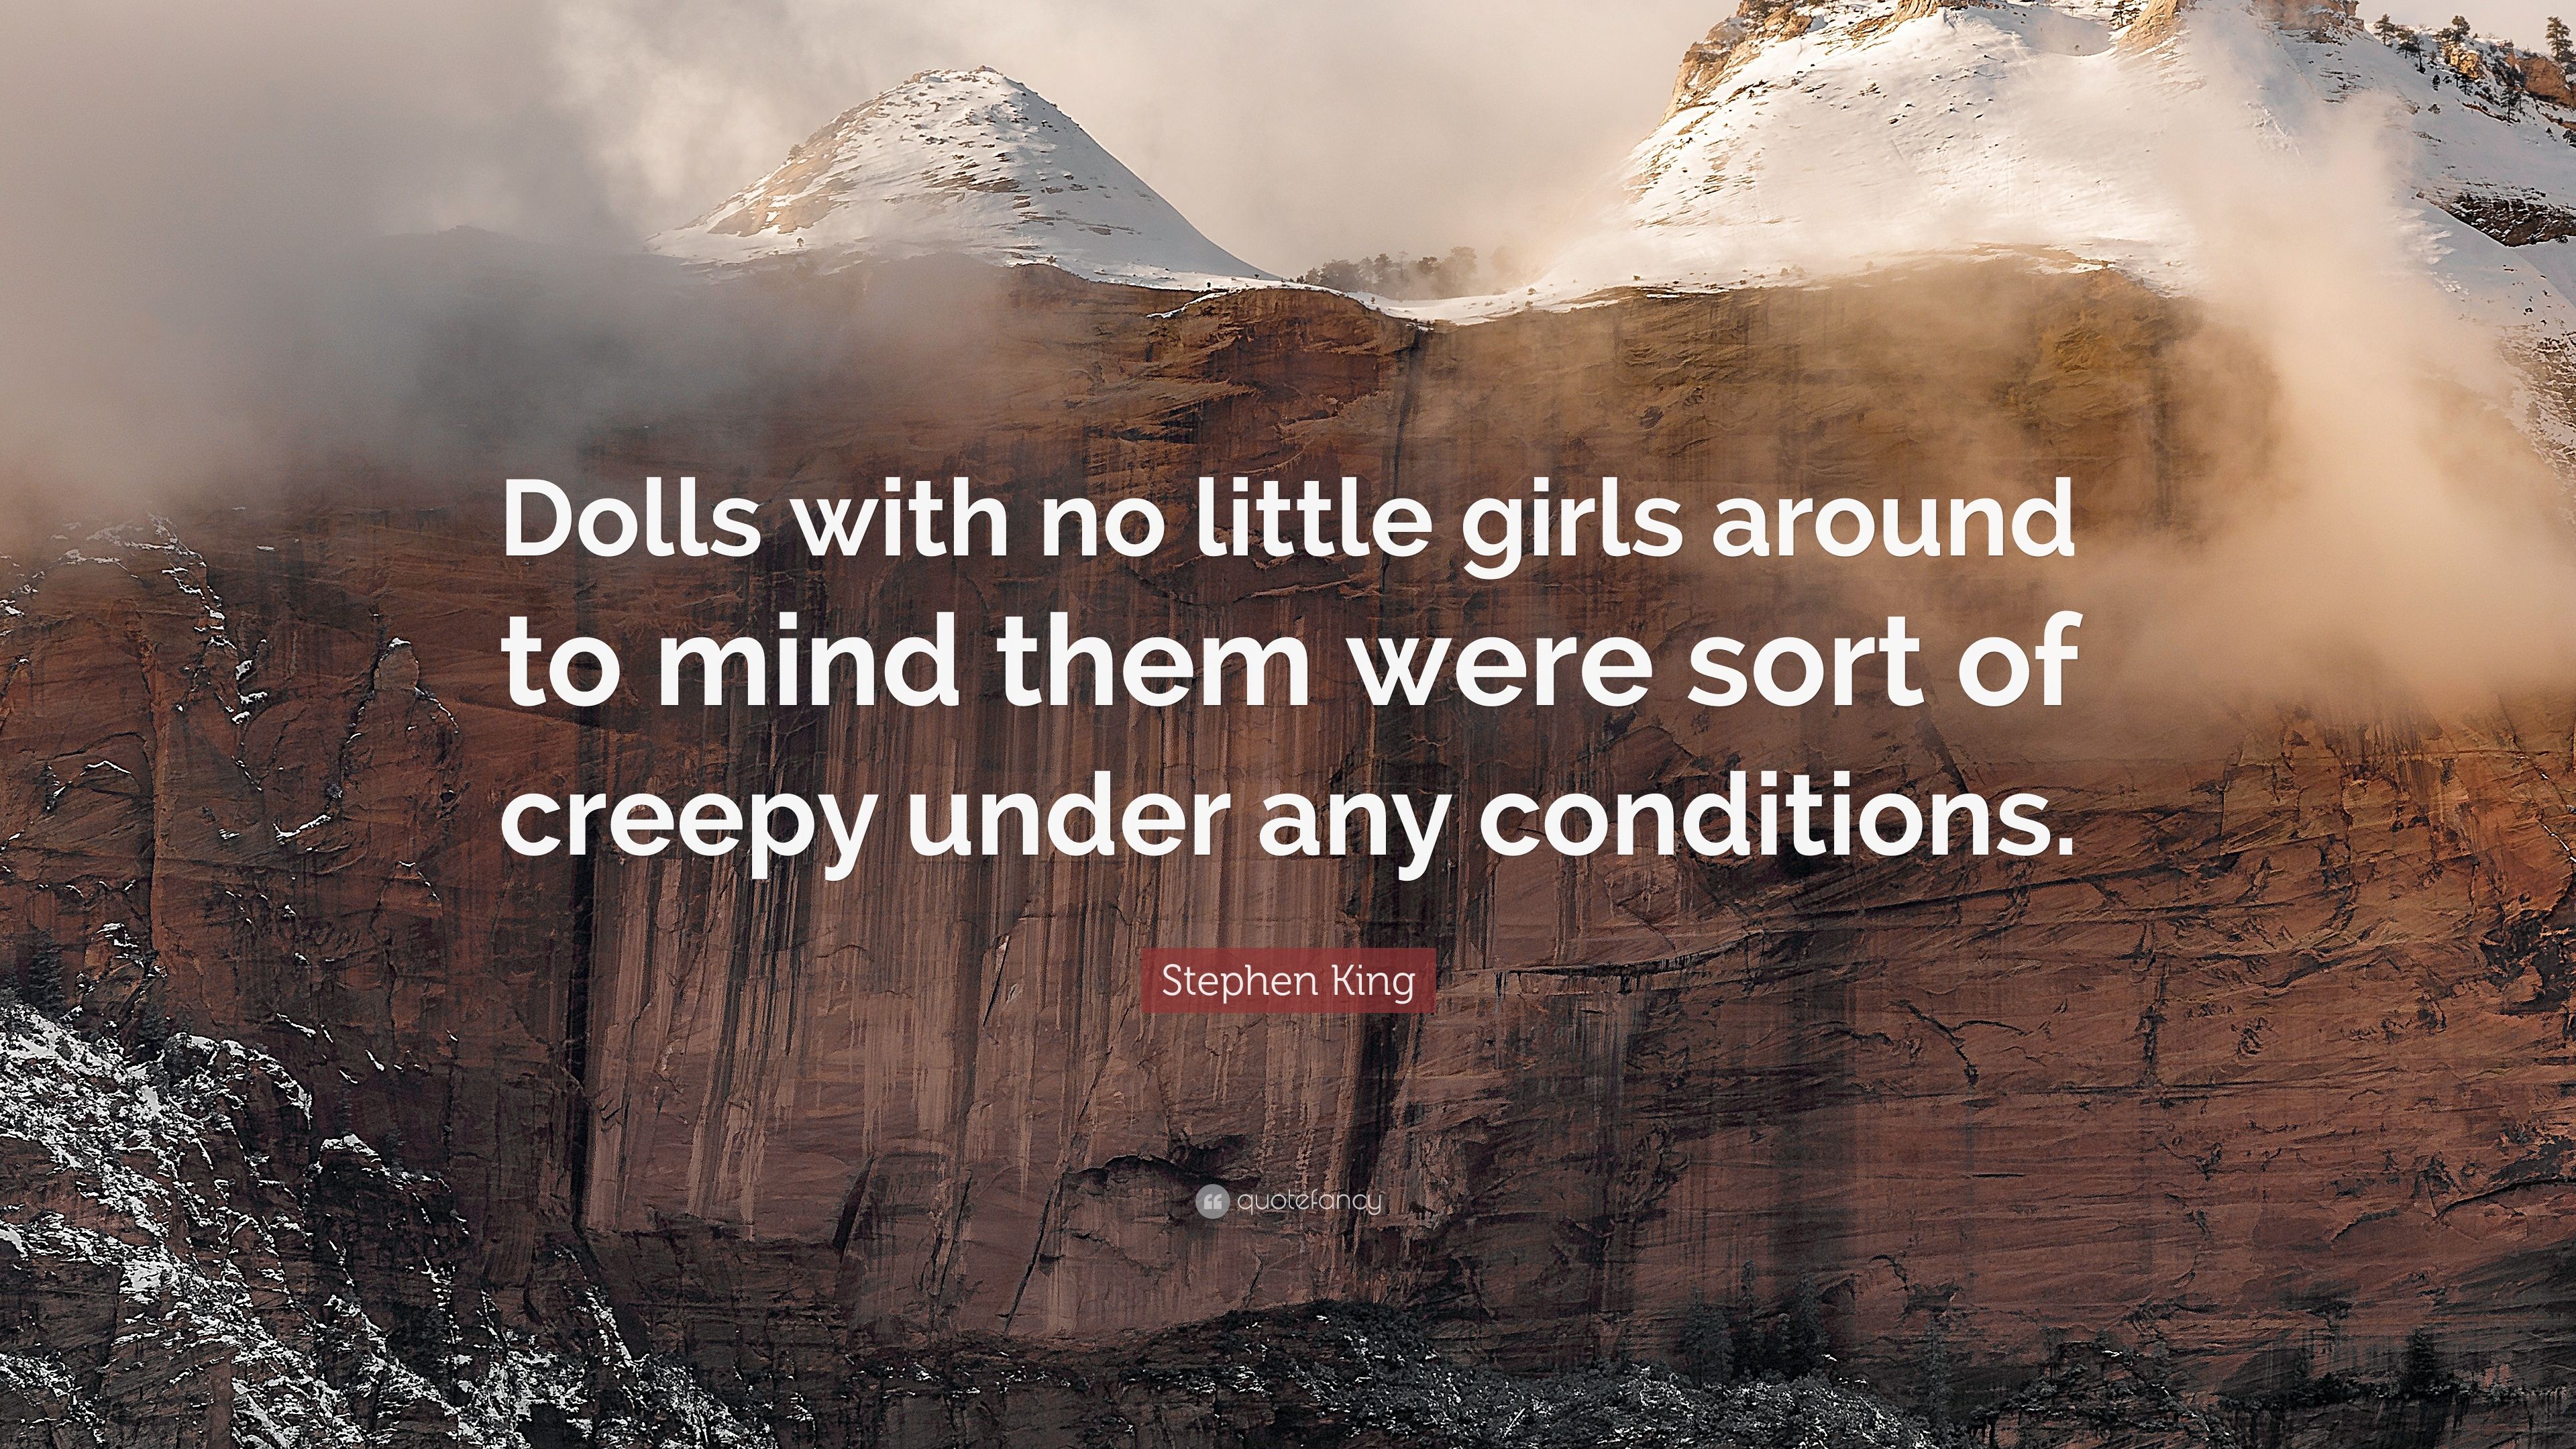 Stephen King Quote: “Dolls with no little girls around to mind them